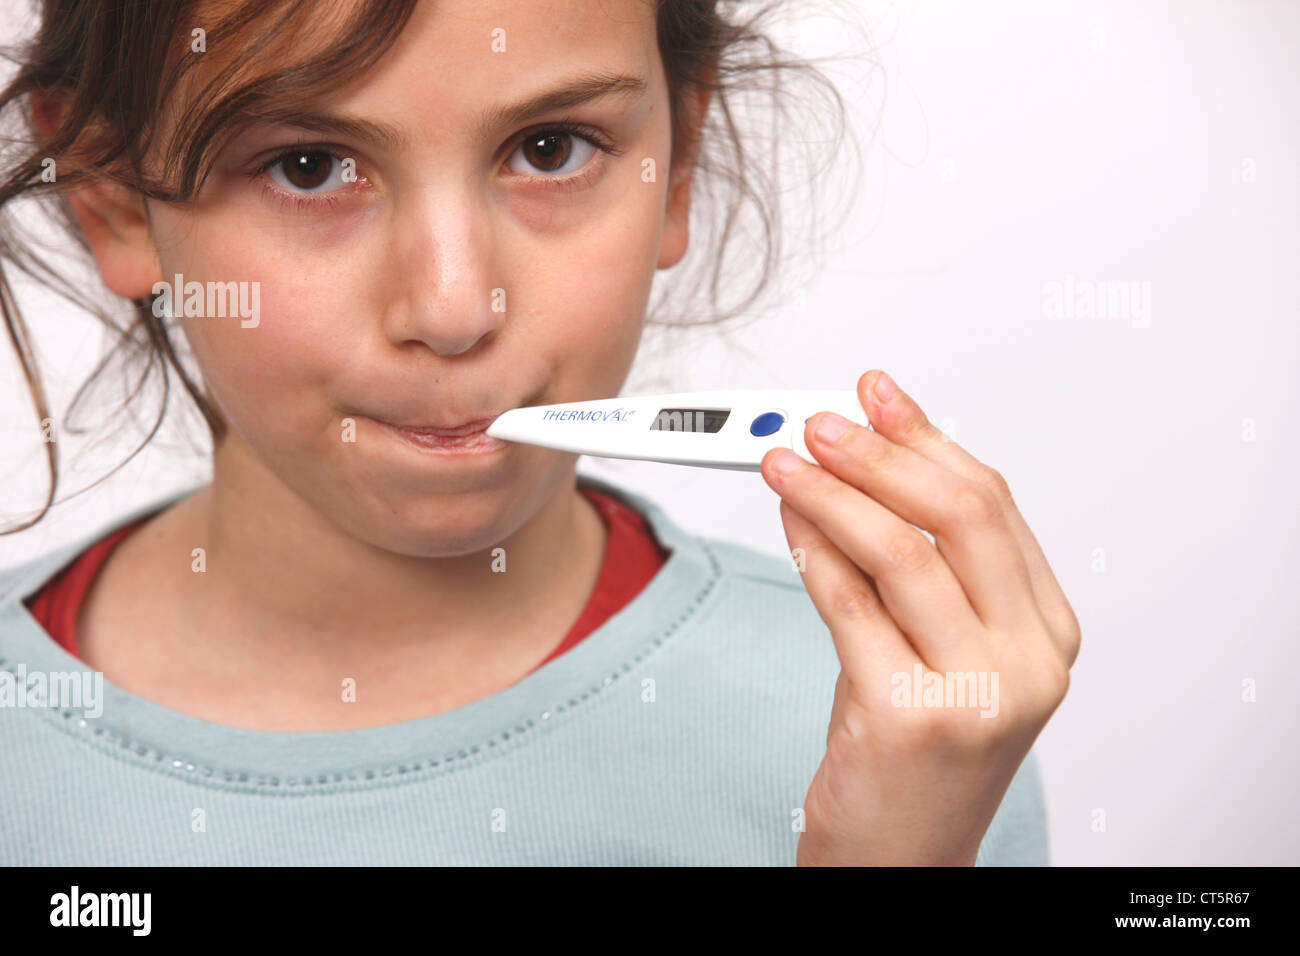 FEVER IN A CHILD Stock Photo